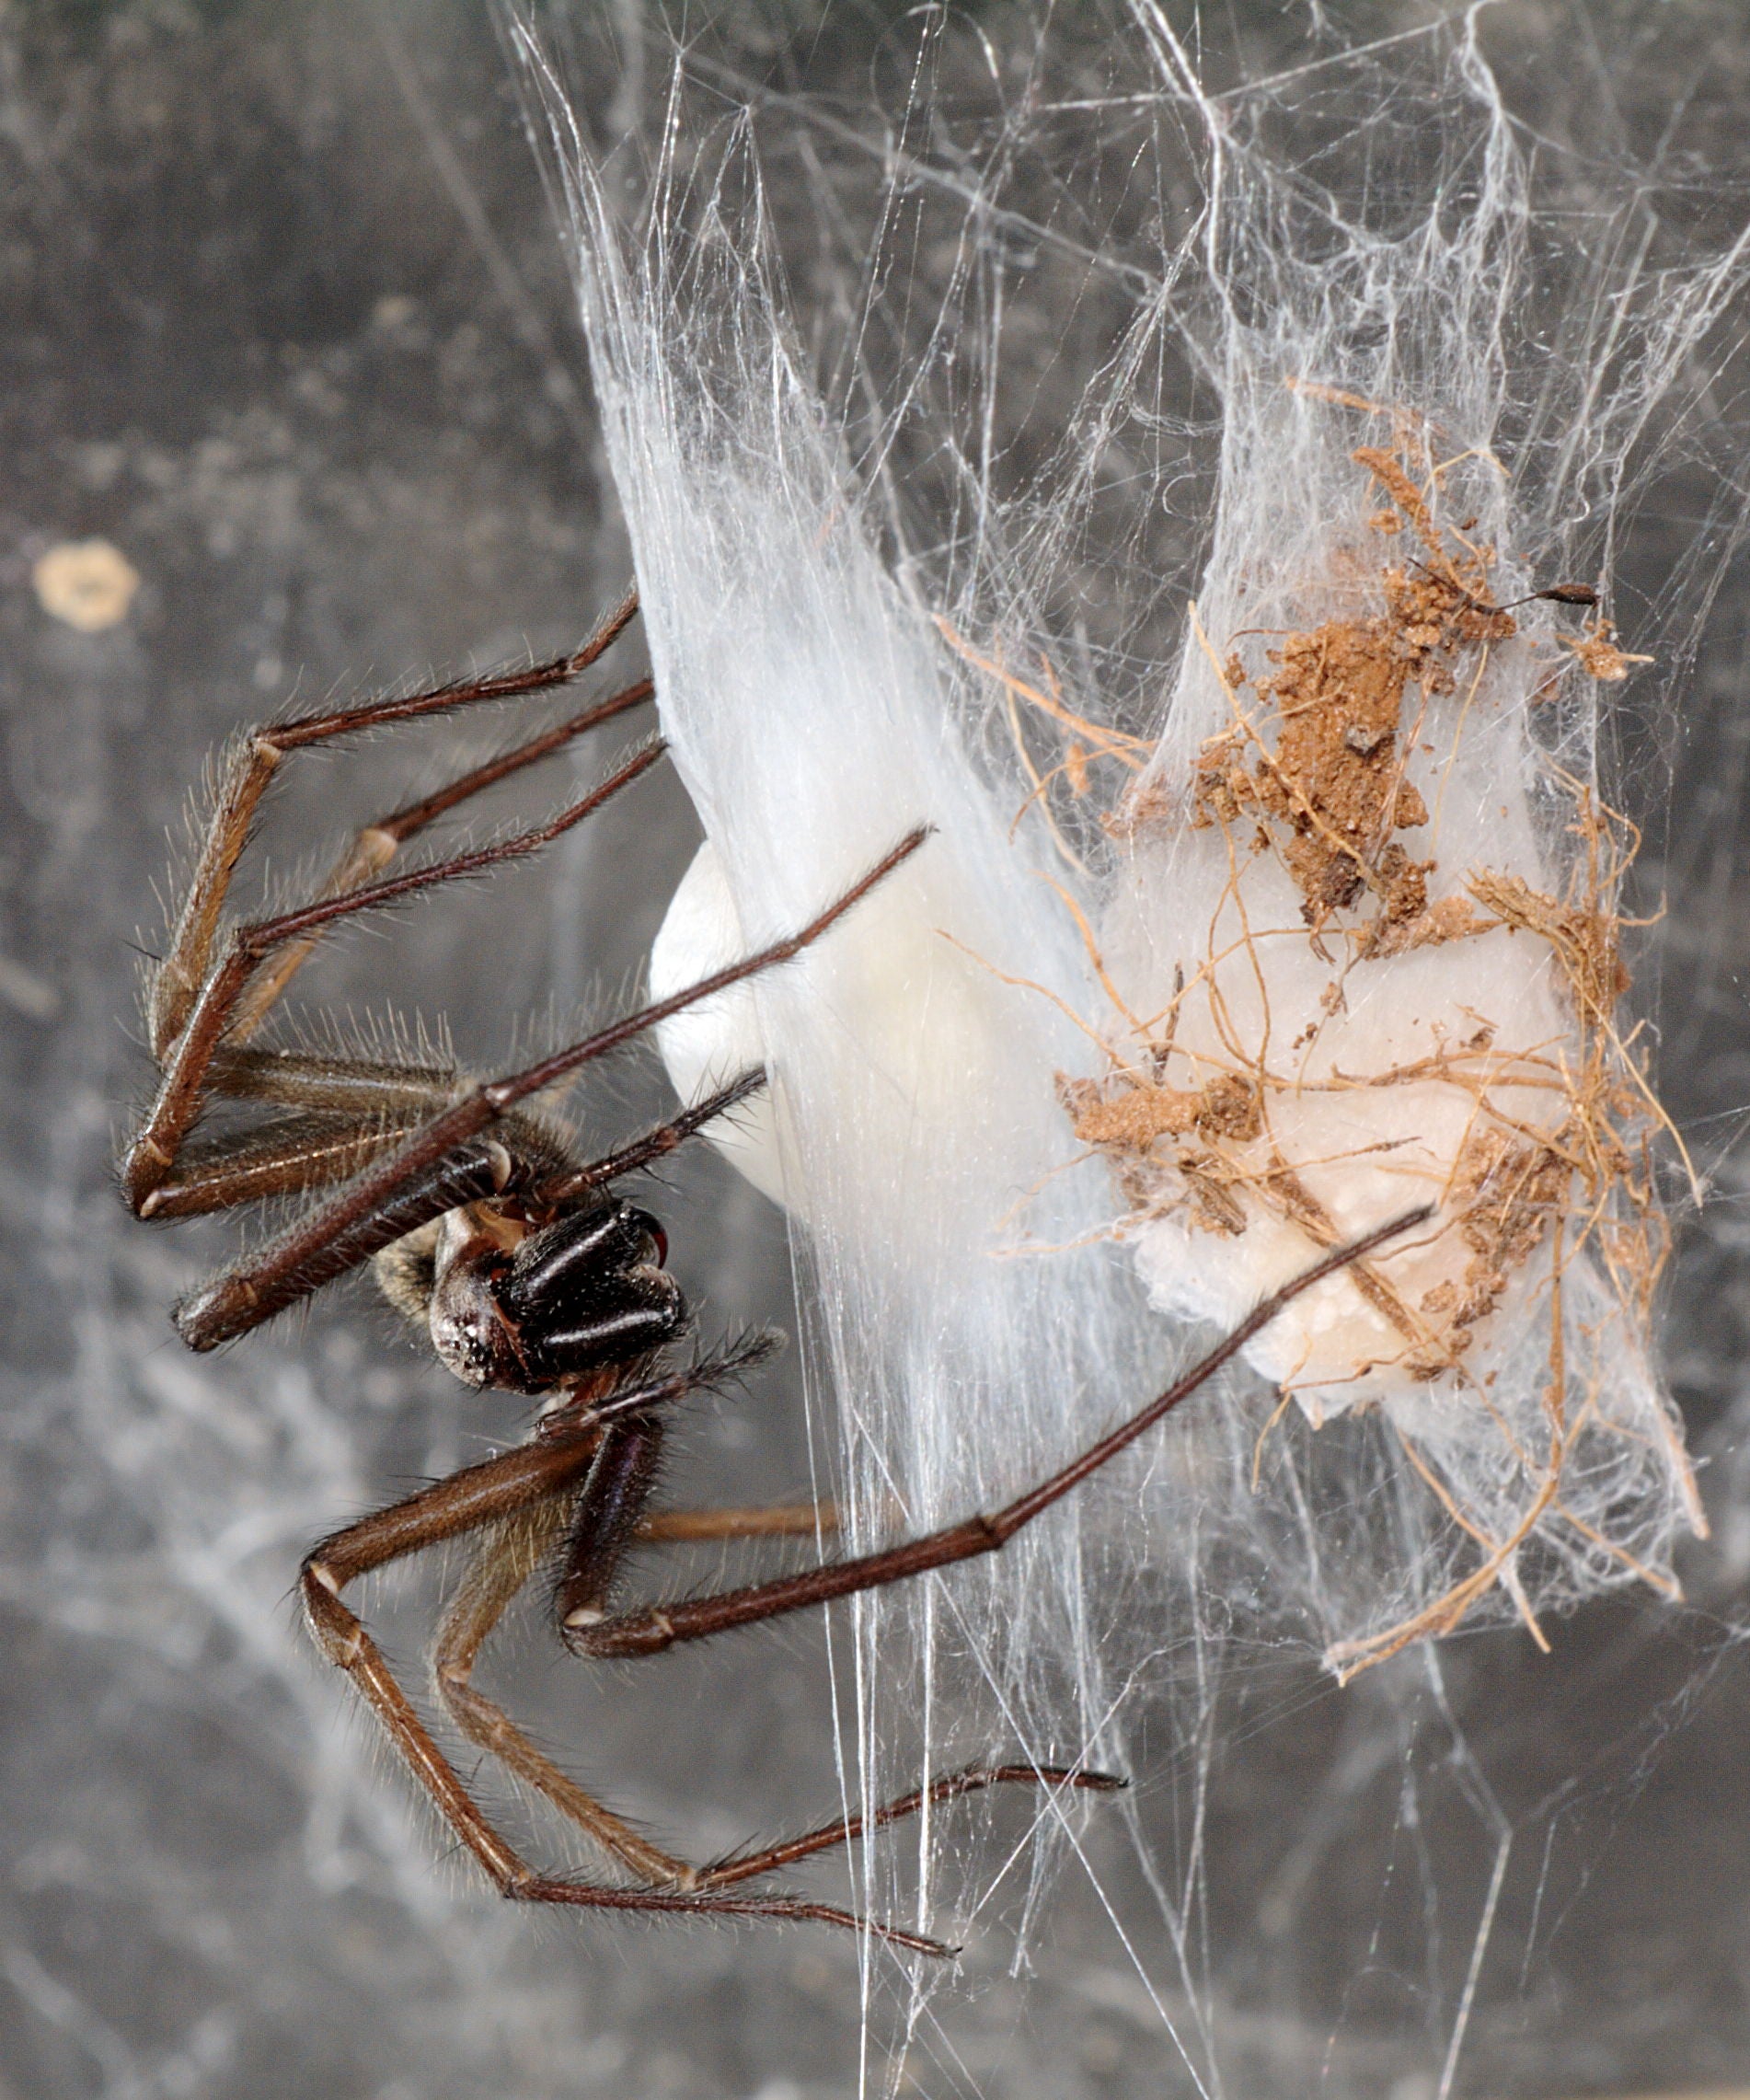 A giant house spider creating an egg sack